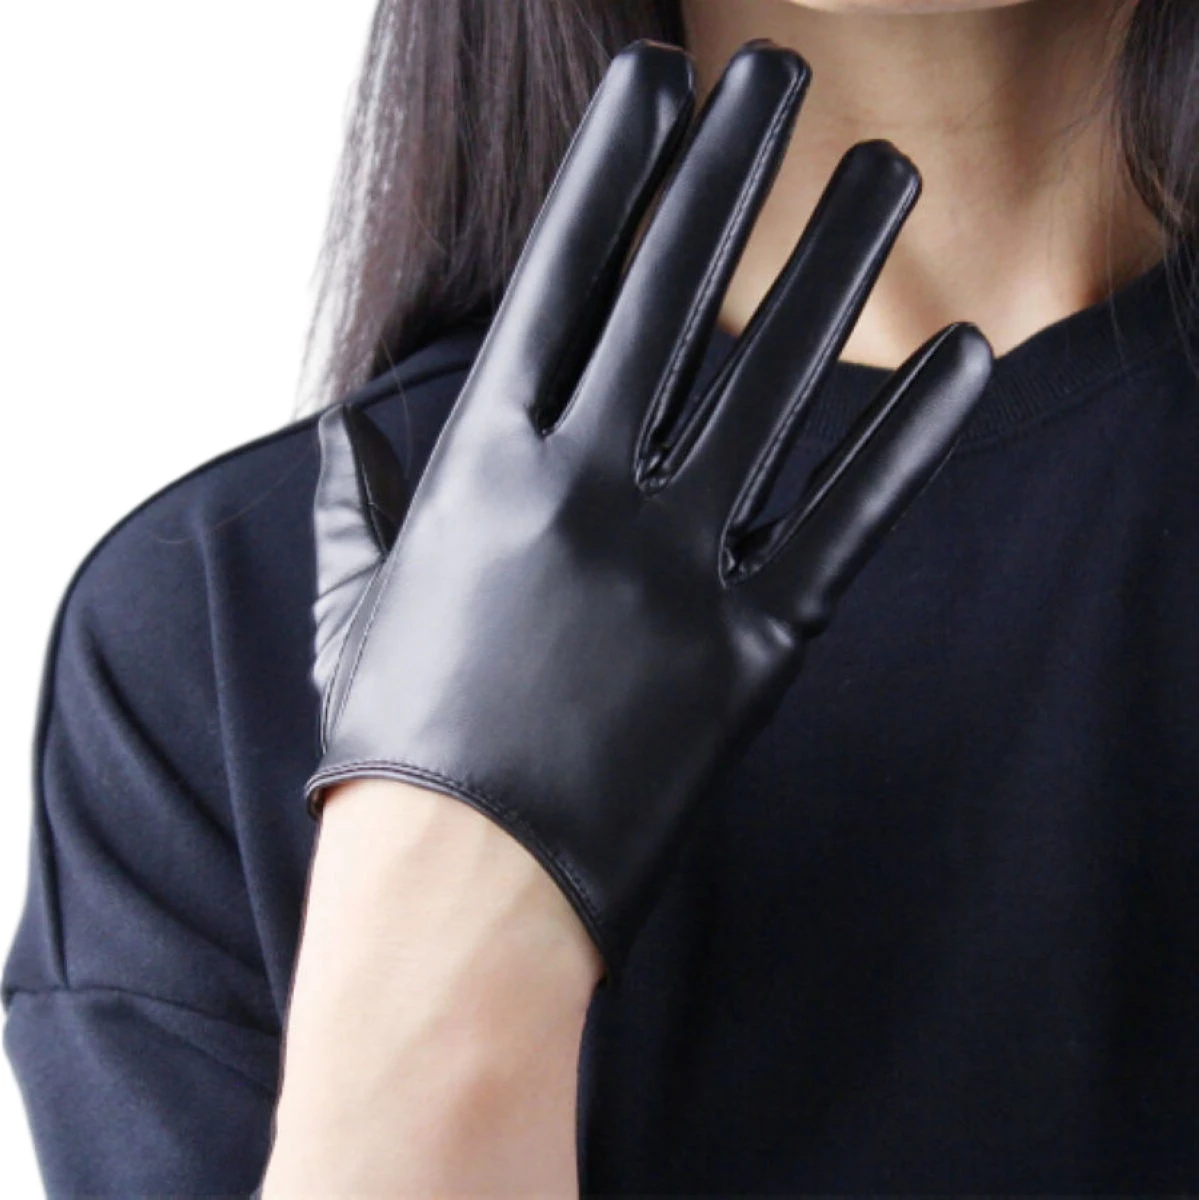 

DooWay Women's Black Short Fashion Gloves Soft Faux Leather Wrist Evening Party Cosplay Costume Dressing Outdoor Driving Glove